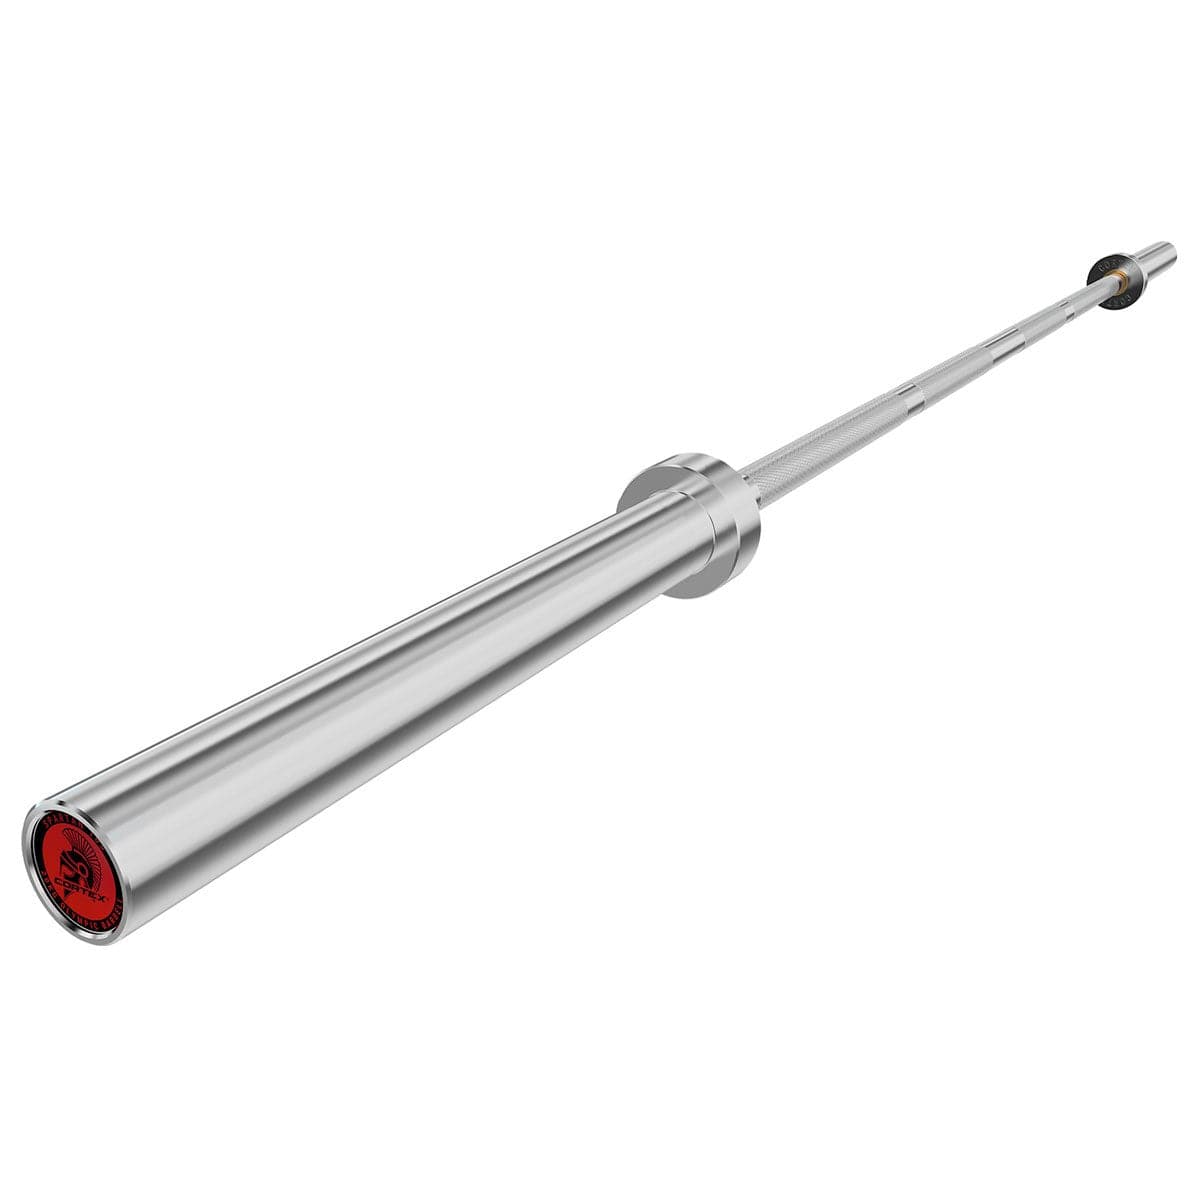 SPARTAN100 7FT 20KG OLYMPIC BARBELL (CHROME) WITH SPRING COLLARS